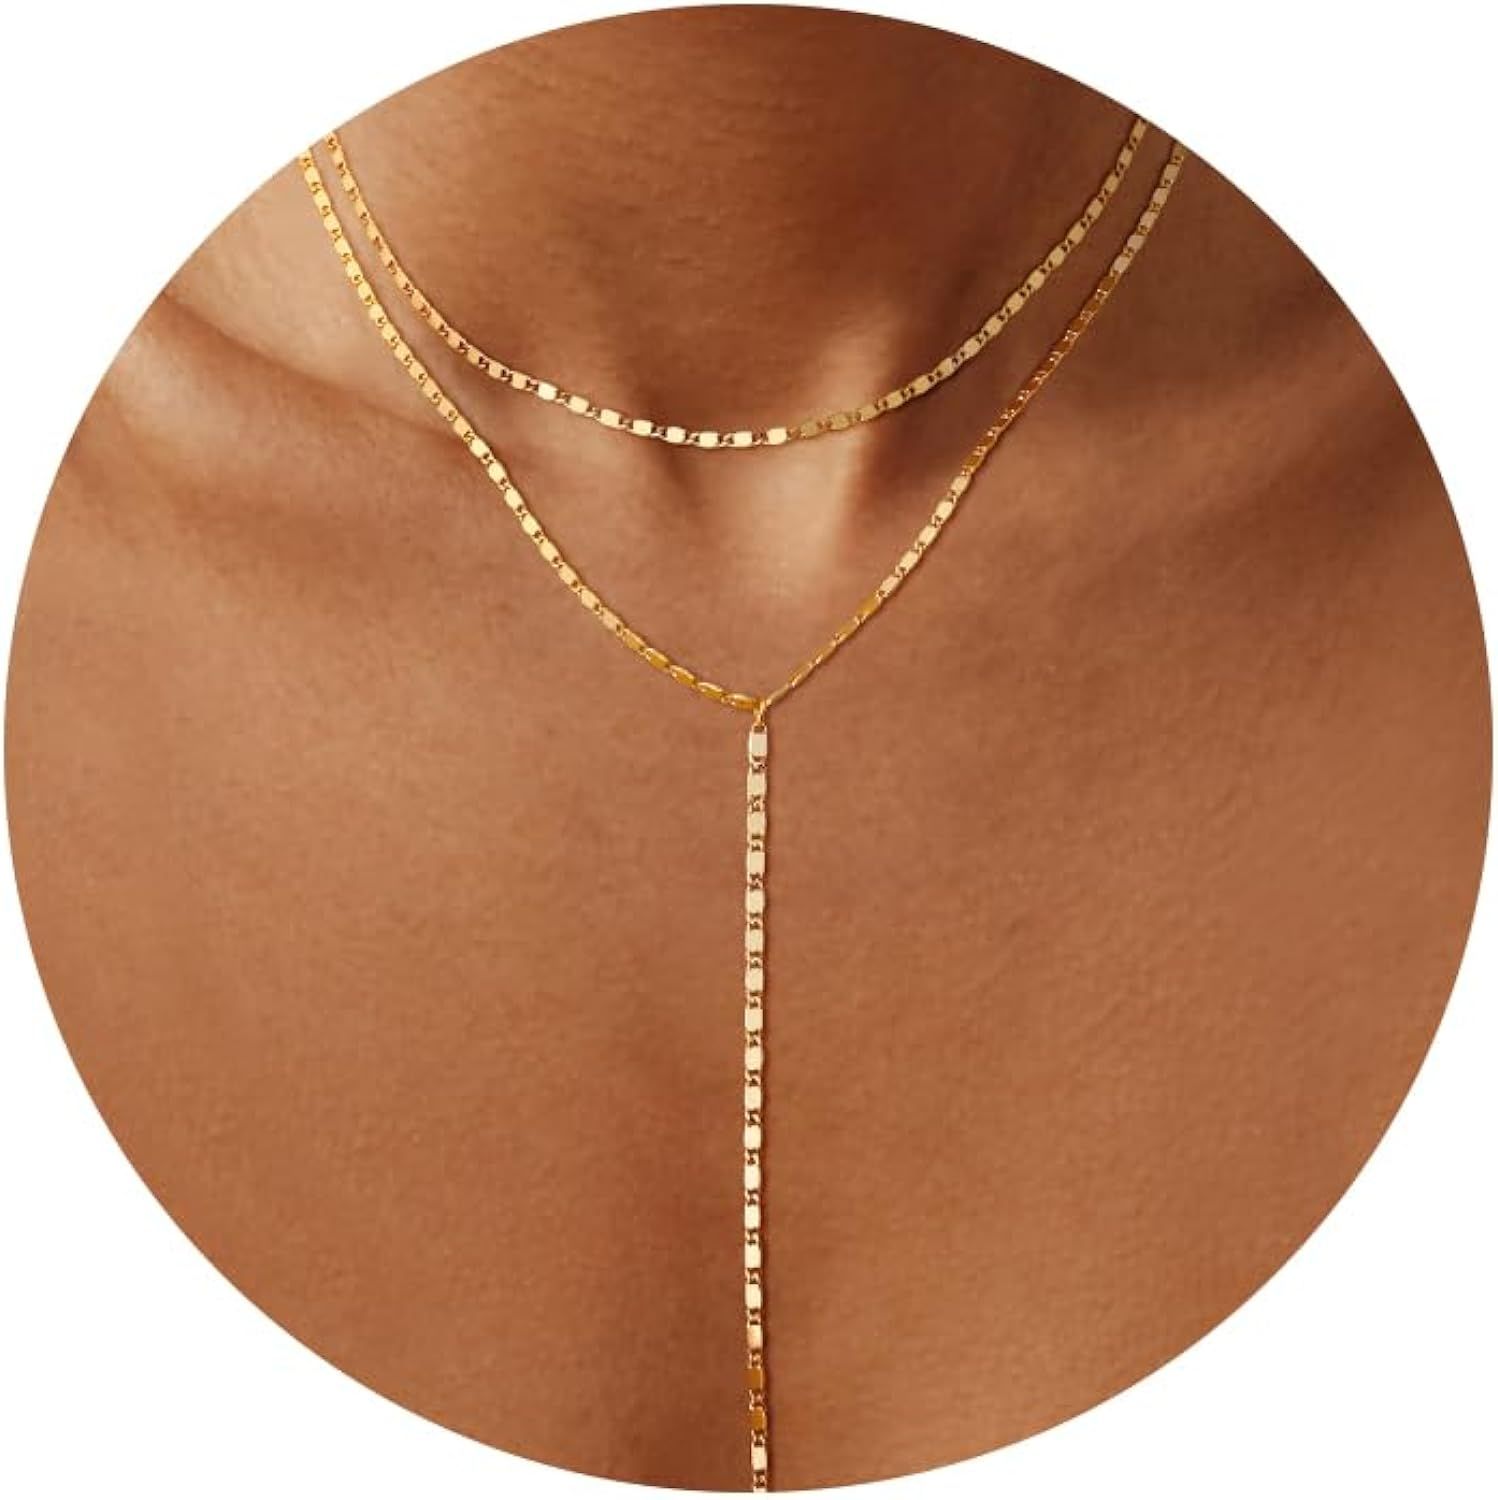 Dainty Long Gold Necklaces for Women，14k Gold Plated Lariat Y-Shaped Necklace Fashion Simple Chain Drop Necklaces Simple Minimalist Pendant Necklace Waterproof Handmade Jewelry for Women Girls Gifts | Amazon (US)